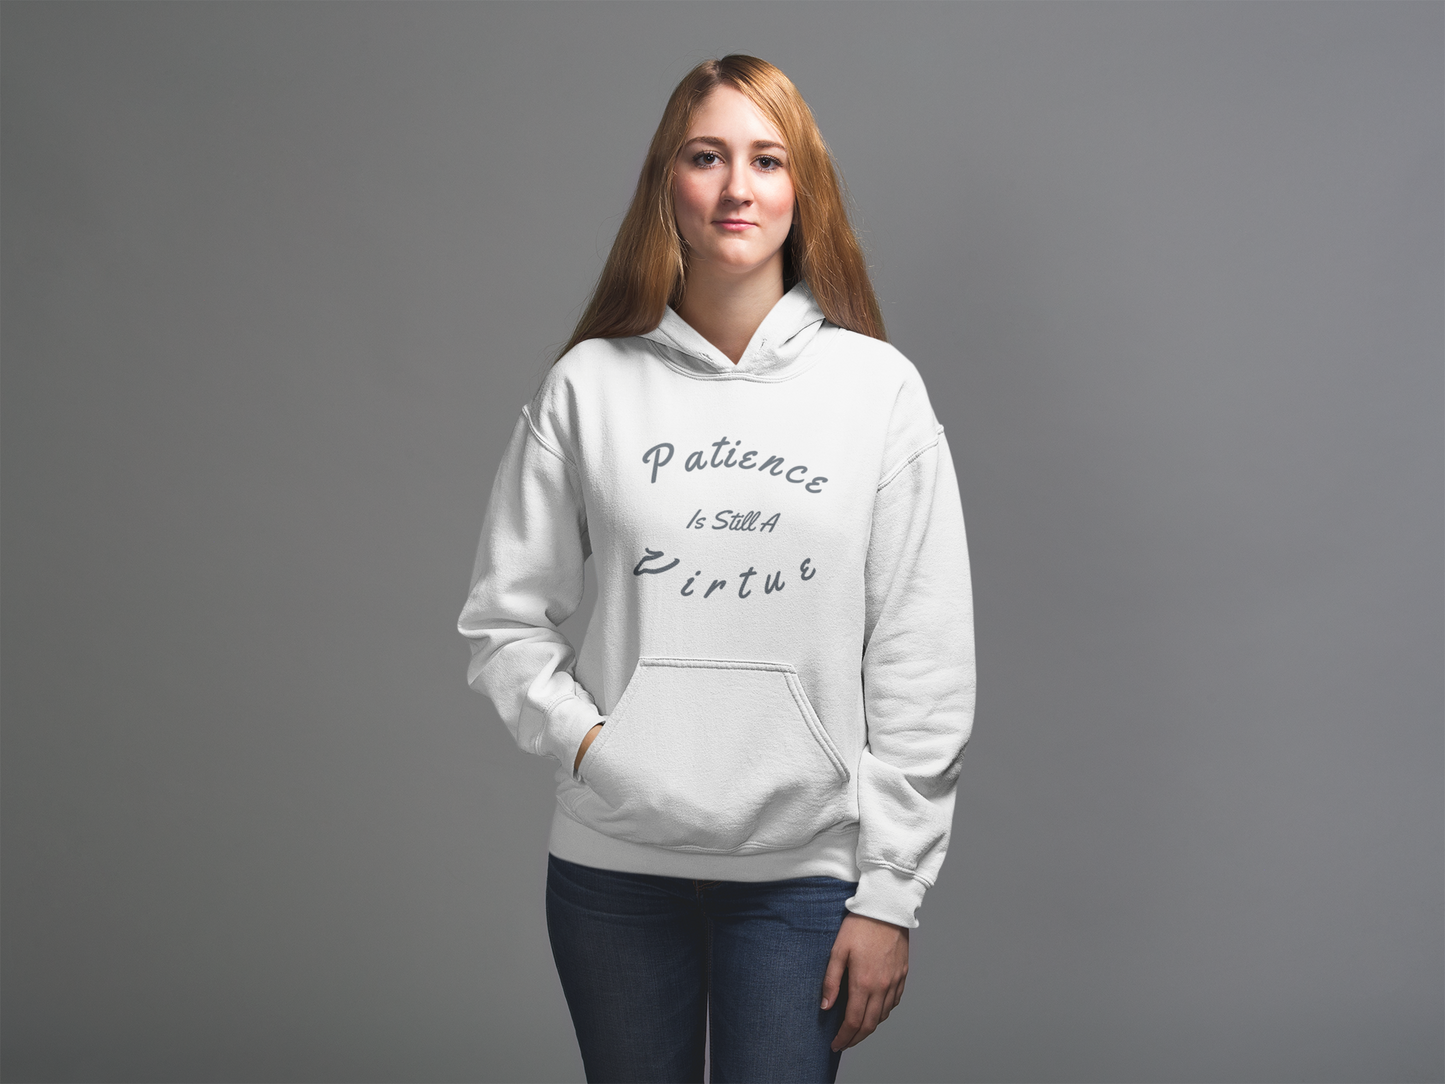 Patience Is Still A Virtue Hoodie, Inspirational Hoodie Wisdom Gift For Him Women Positive Quote Unisex Shirt